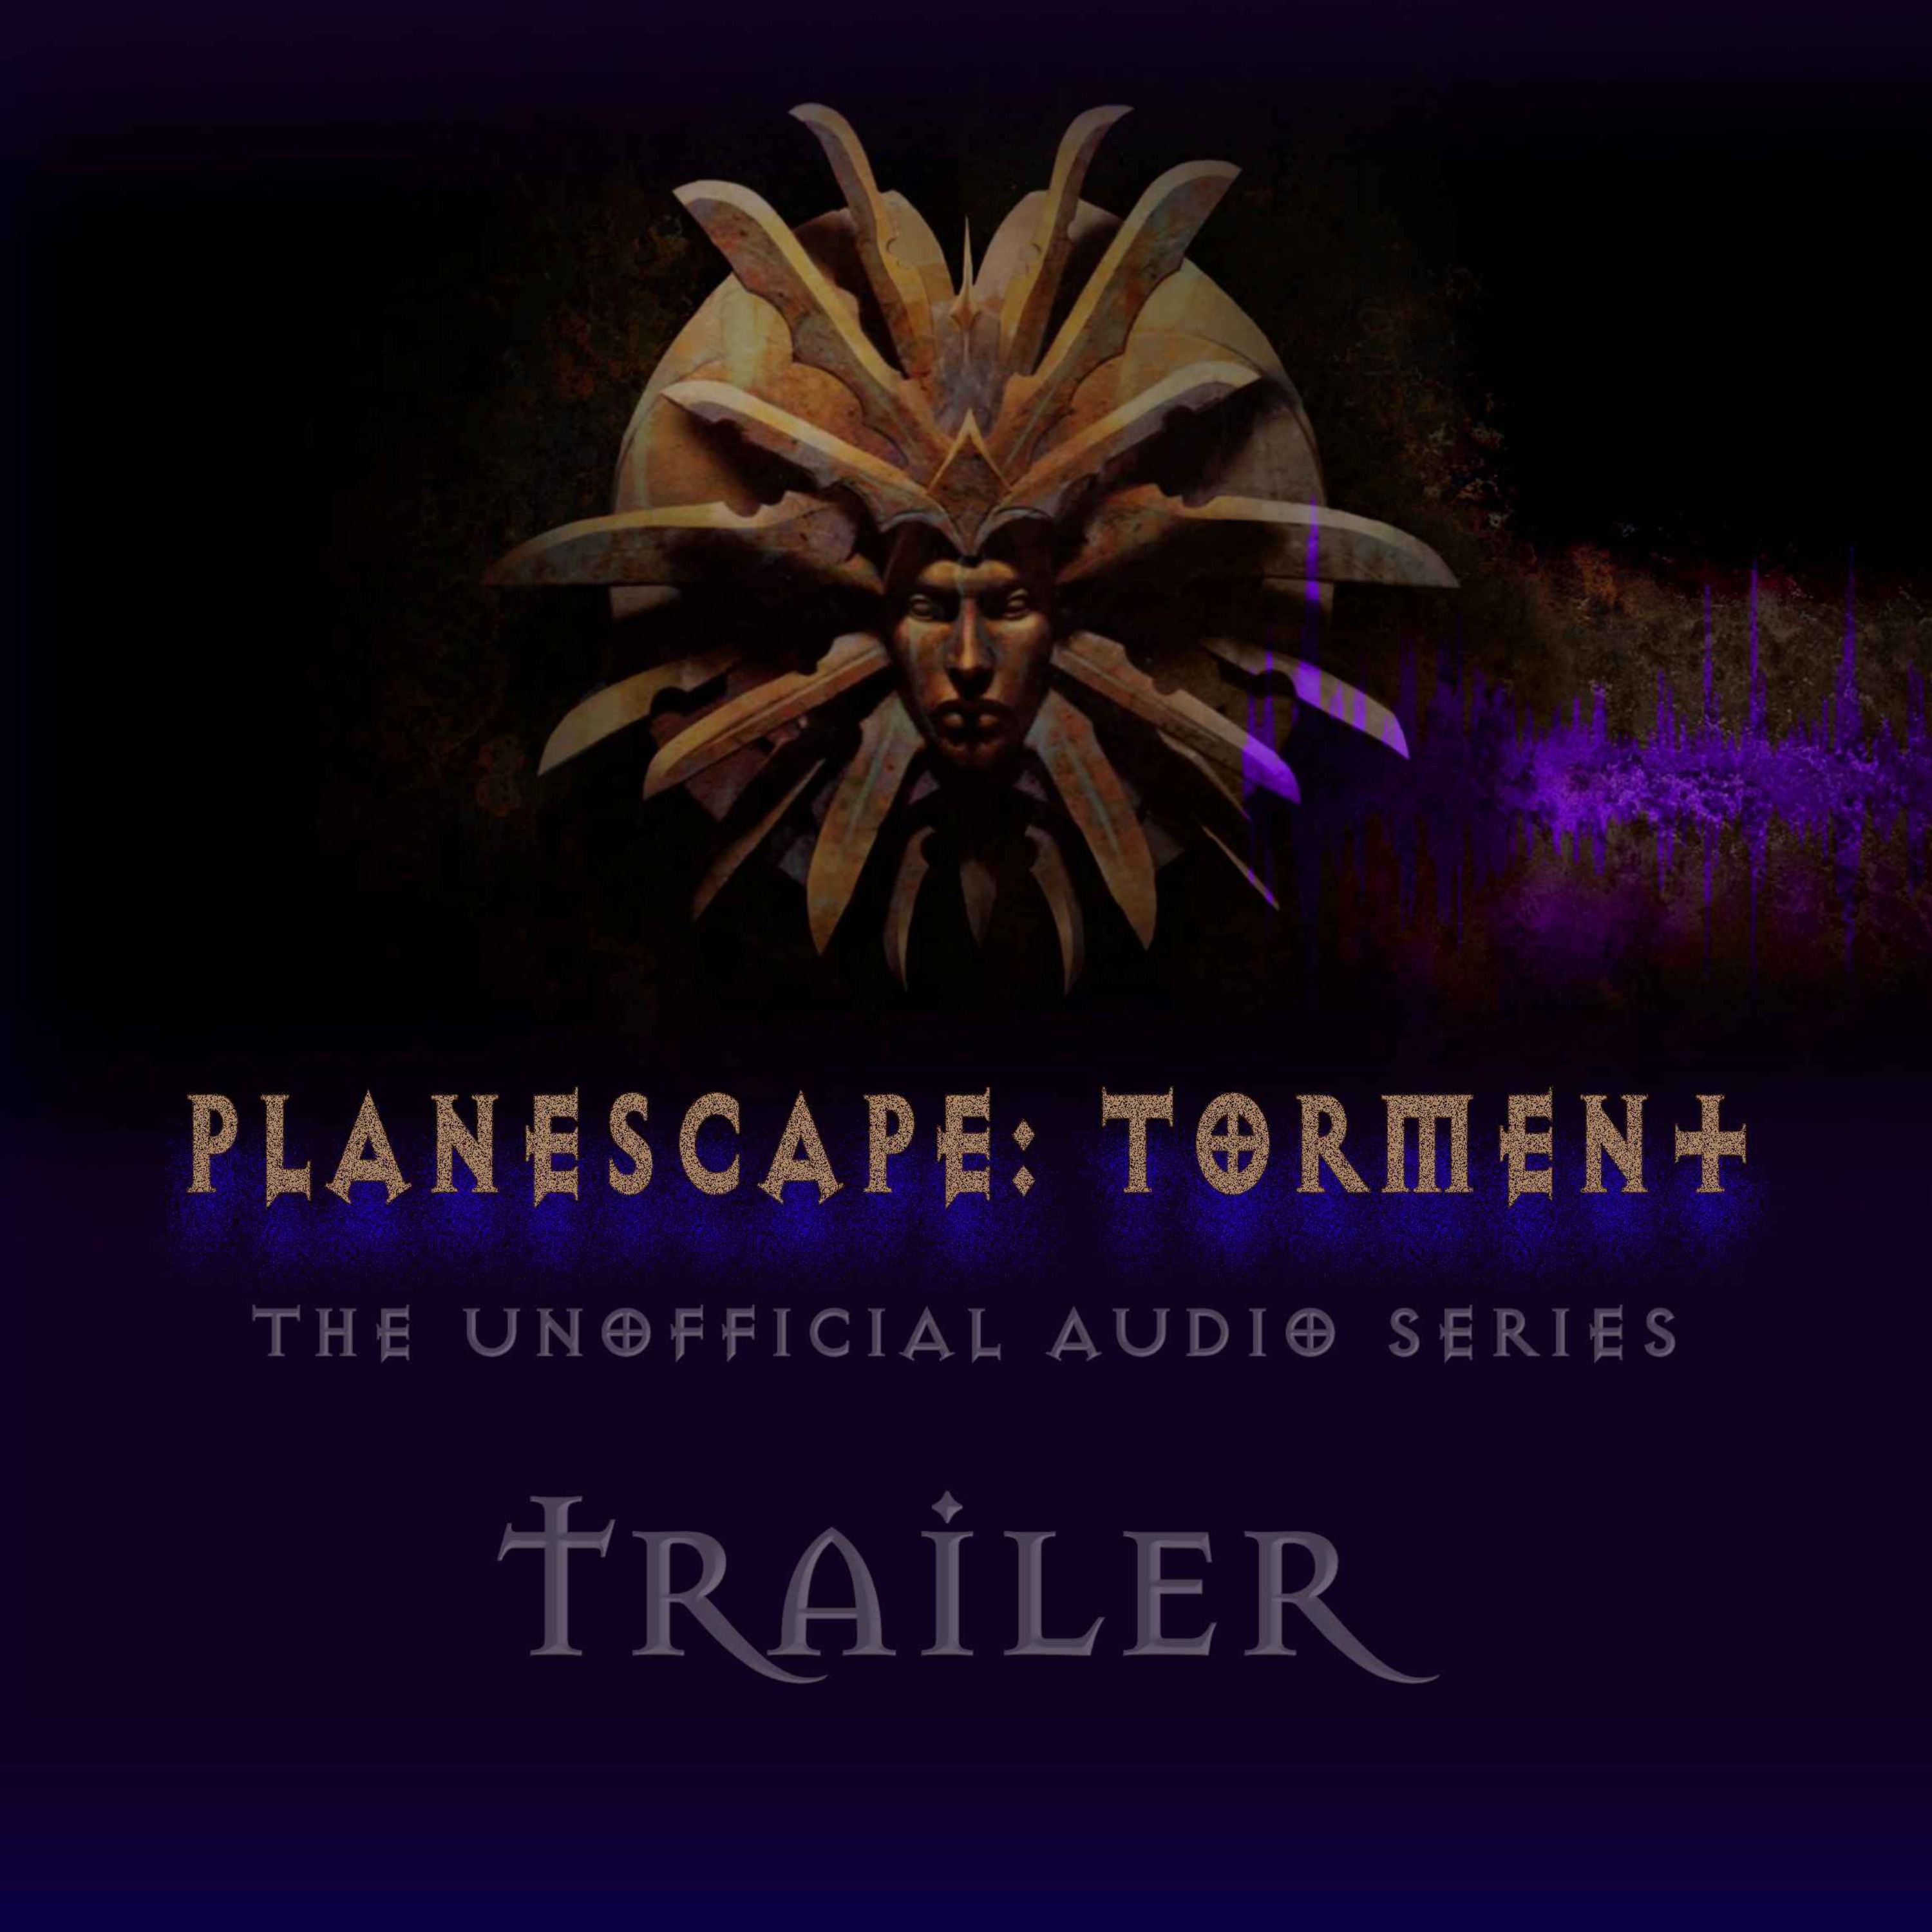 Planescape: Torment - The Unoffical Audio Series, Trailer